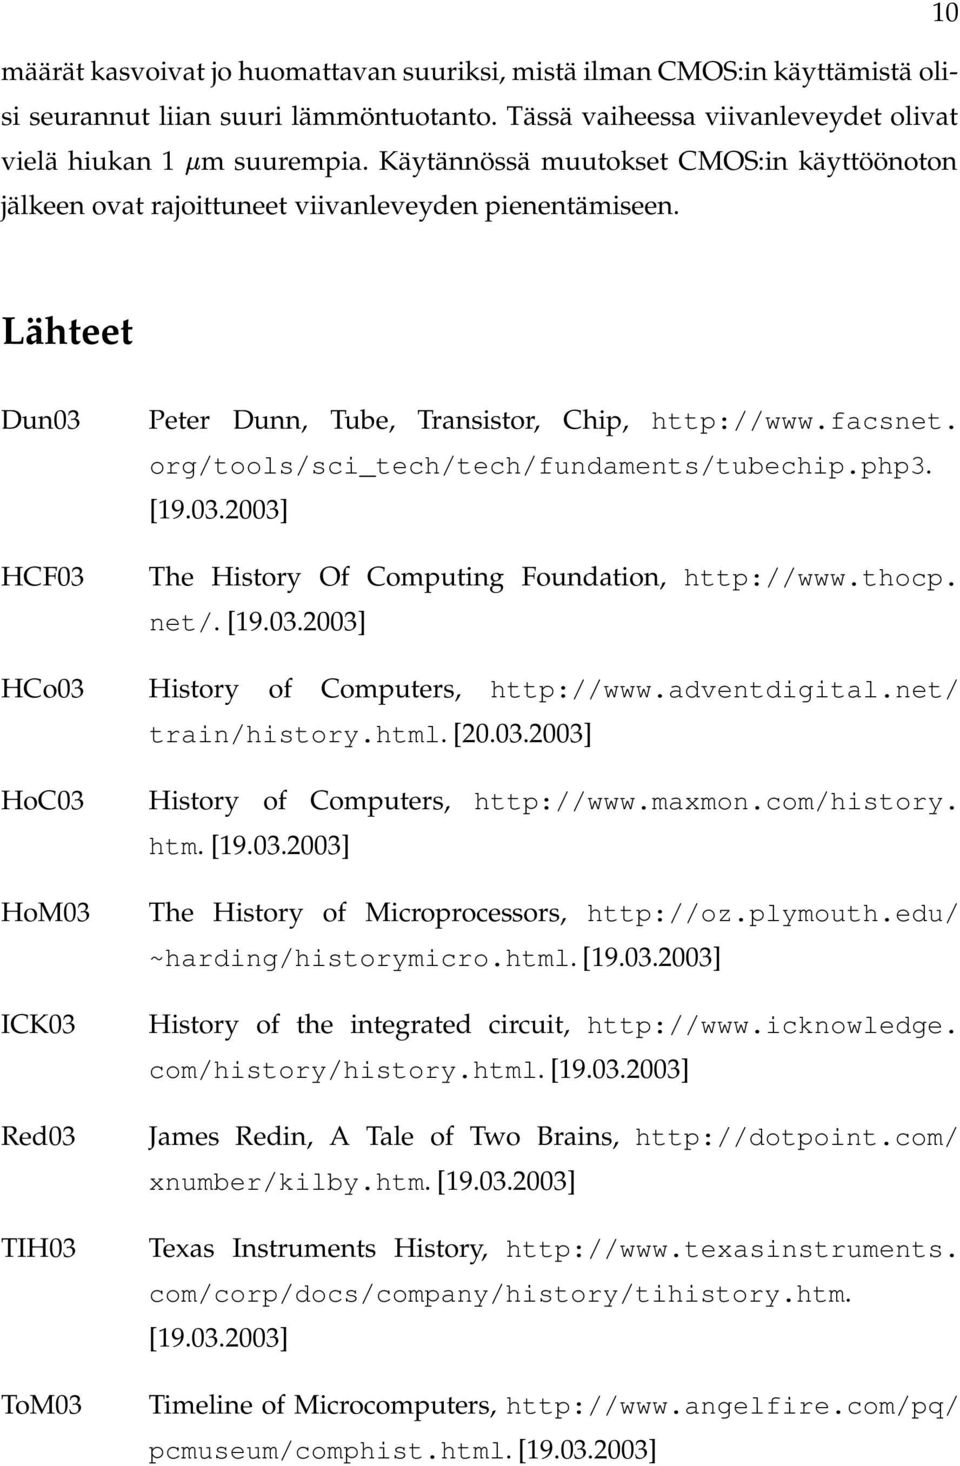 org/tools/sci_tech/tech/fundaments/tubechip.php3. [19.03.2003] HCF03 The History Of Computing Foundation, http://www.thocp. net/. [19.03.2003] HCo03 History of Computers, http://www.adventdigital.